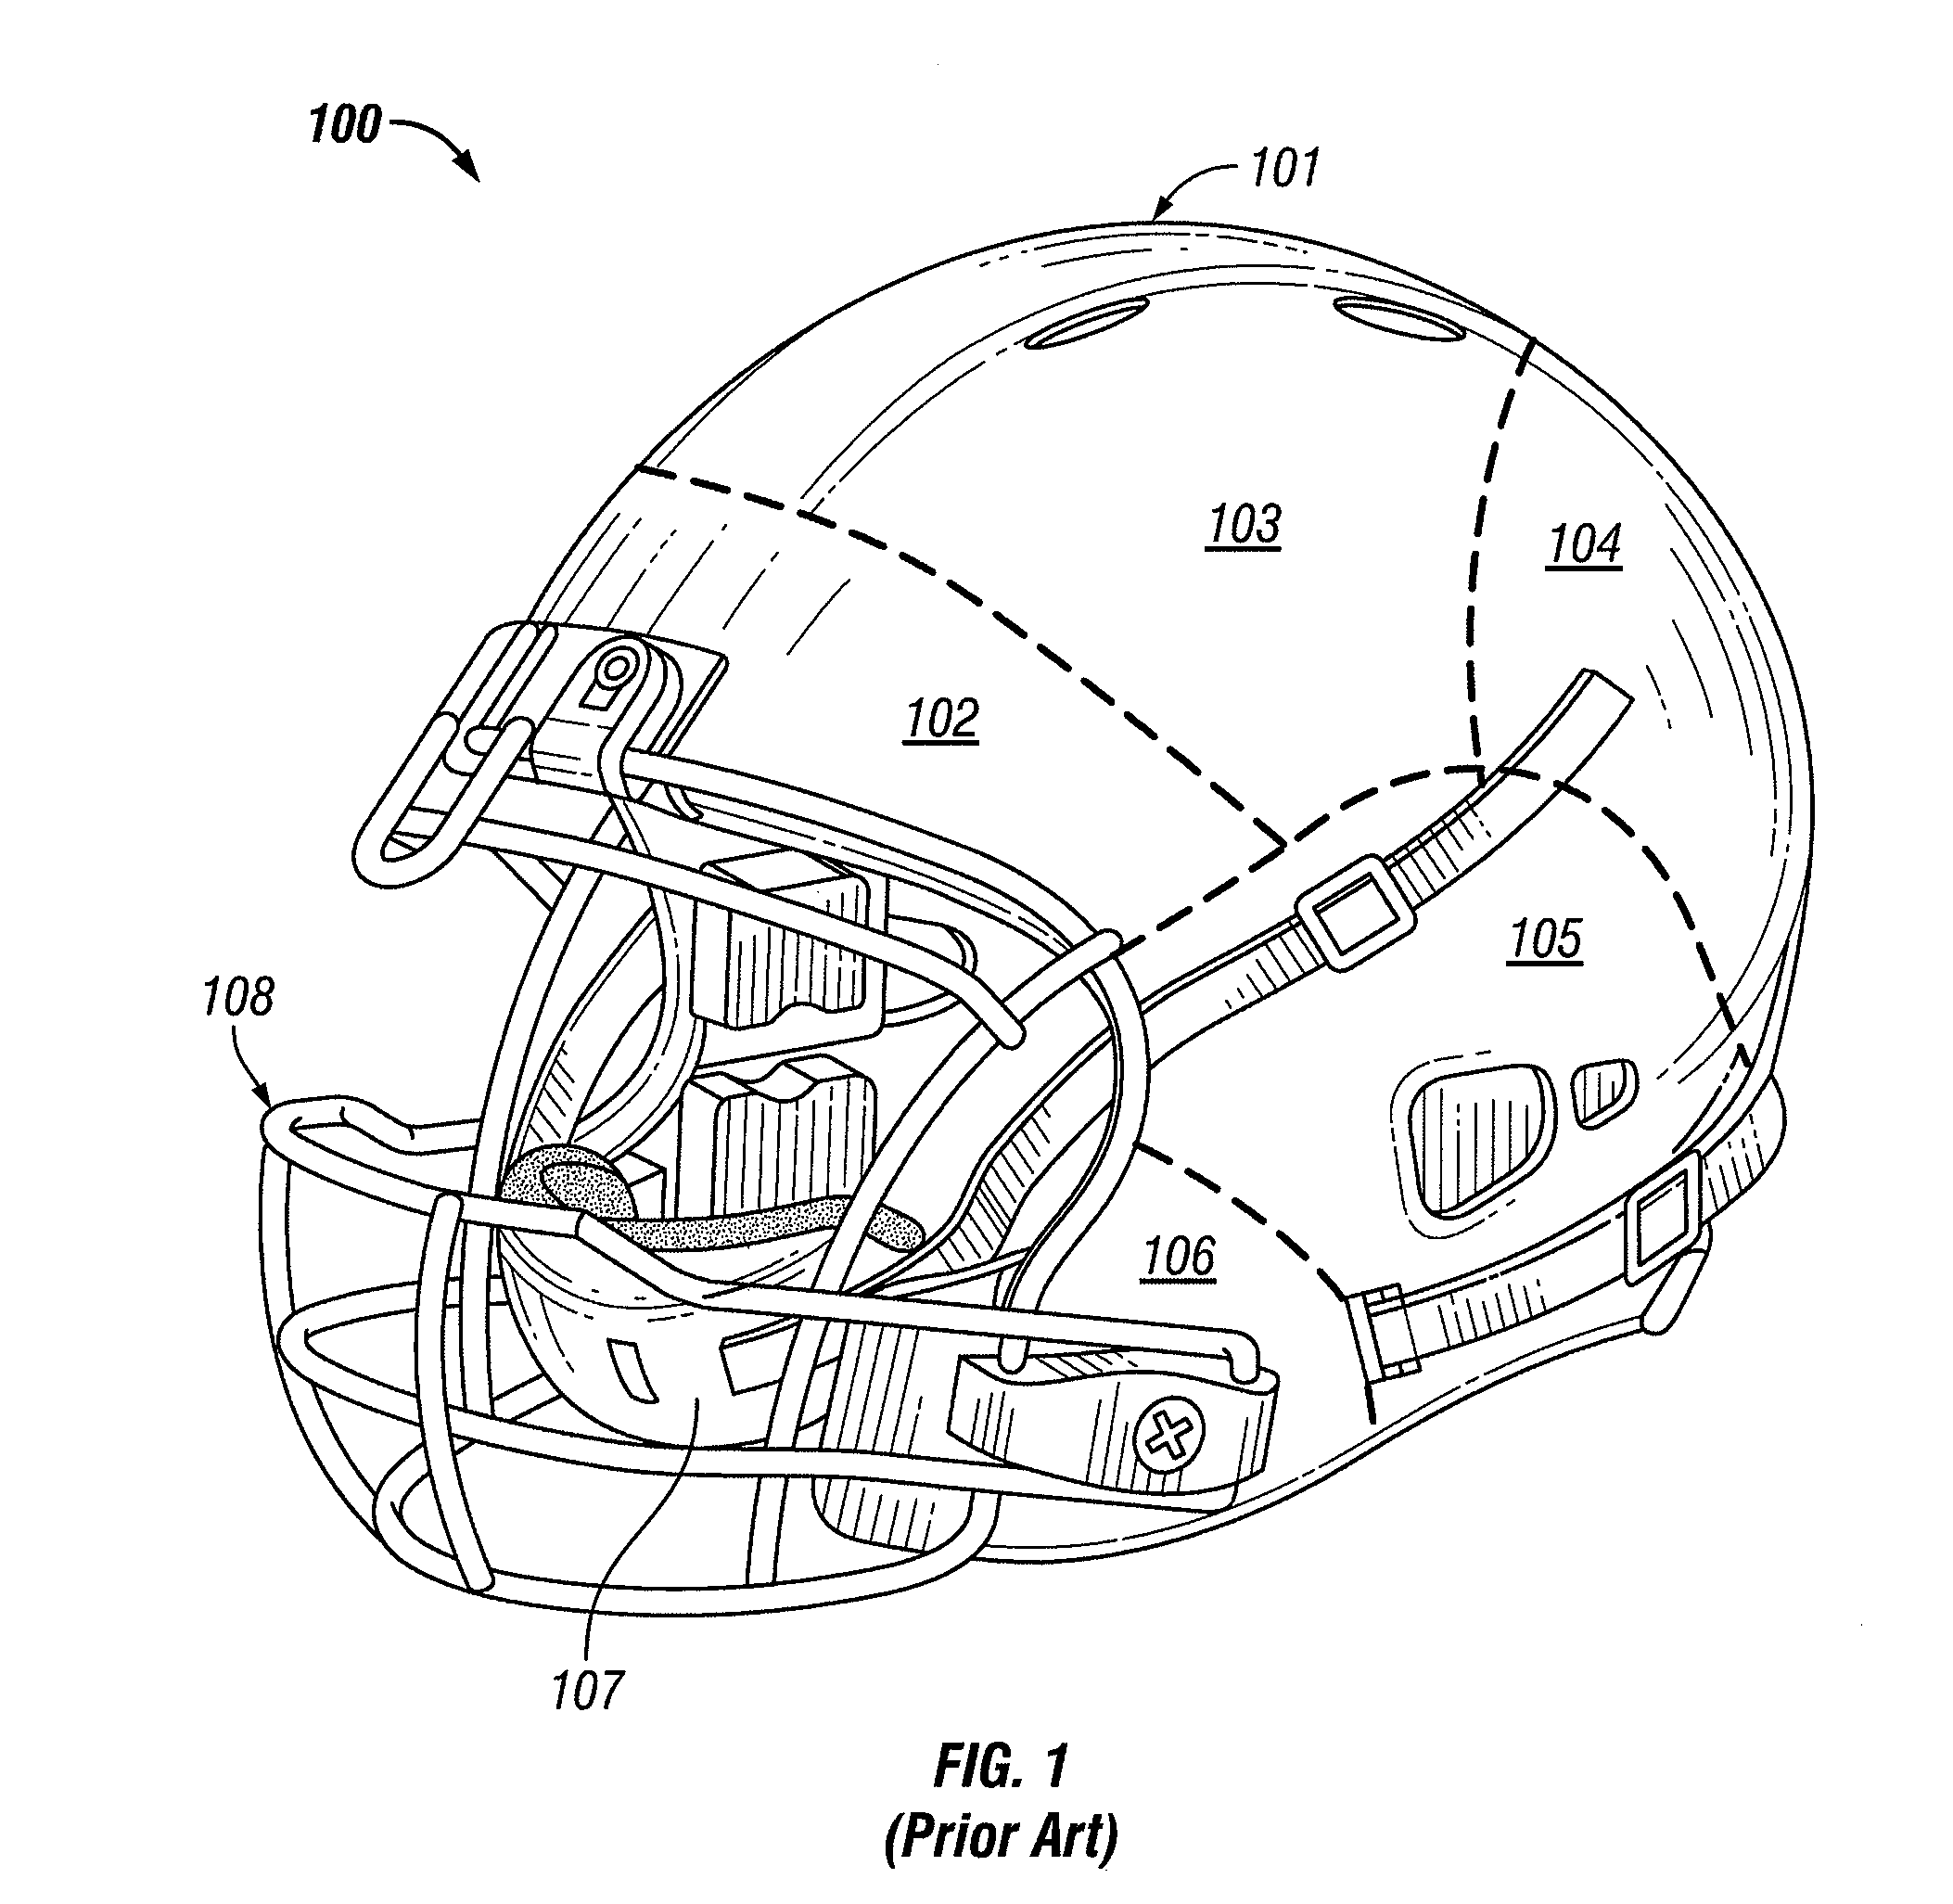 Protective sports helmet with energy-absorbing padding and a facemask with force-distributing shock absorbers